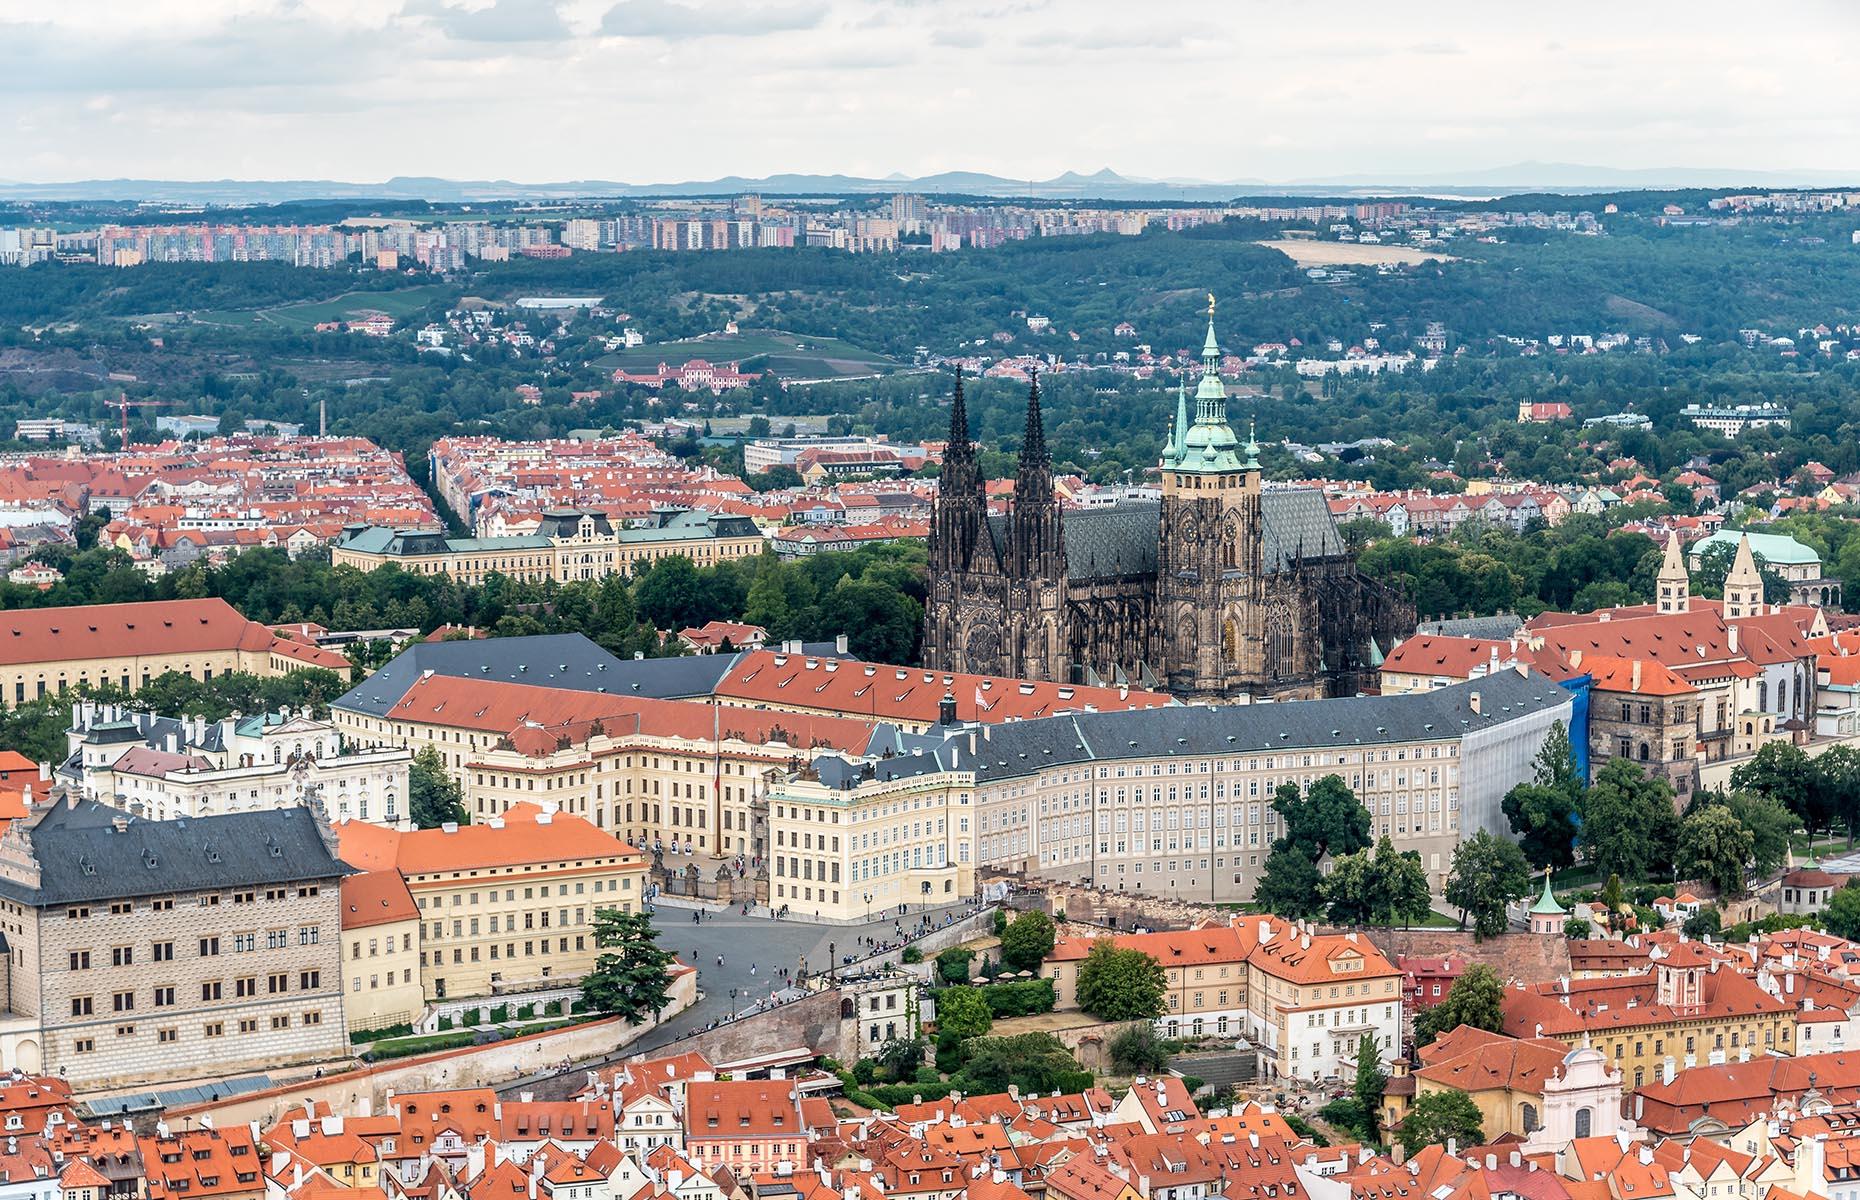 Slide 20 of 61: Prague Castle is quite the feat. Covering an area of around 750,000 square feet (69,677sqm), the complex is one of the largest of its kind in the world, home to Gothic-style St Vitus Cathedral, as well as several other churches. Dating from the 9th century, the site acts like an architectural textbook for the last millennium and, unsurprisingly, is a UNESCO World Heritage Site.